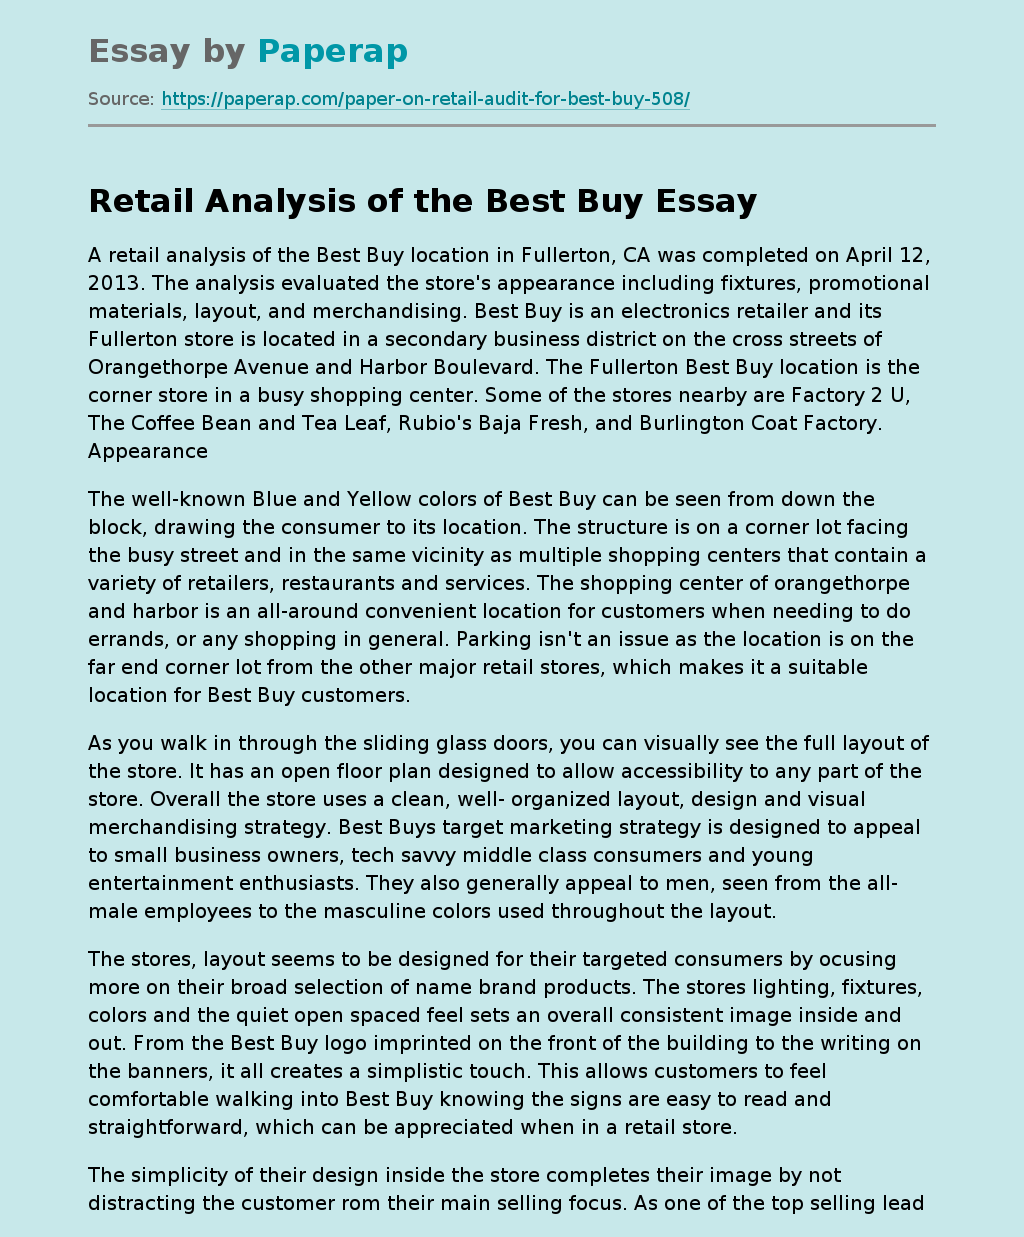 Retail Analysis of the Best Buy